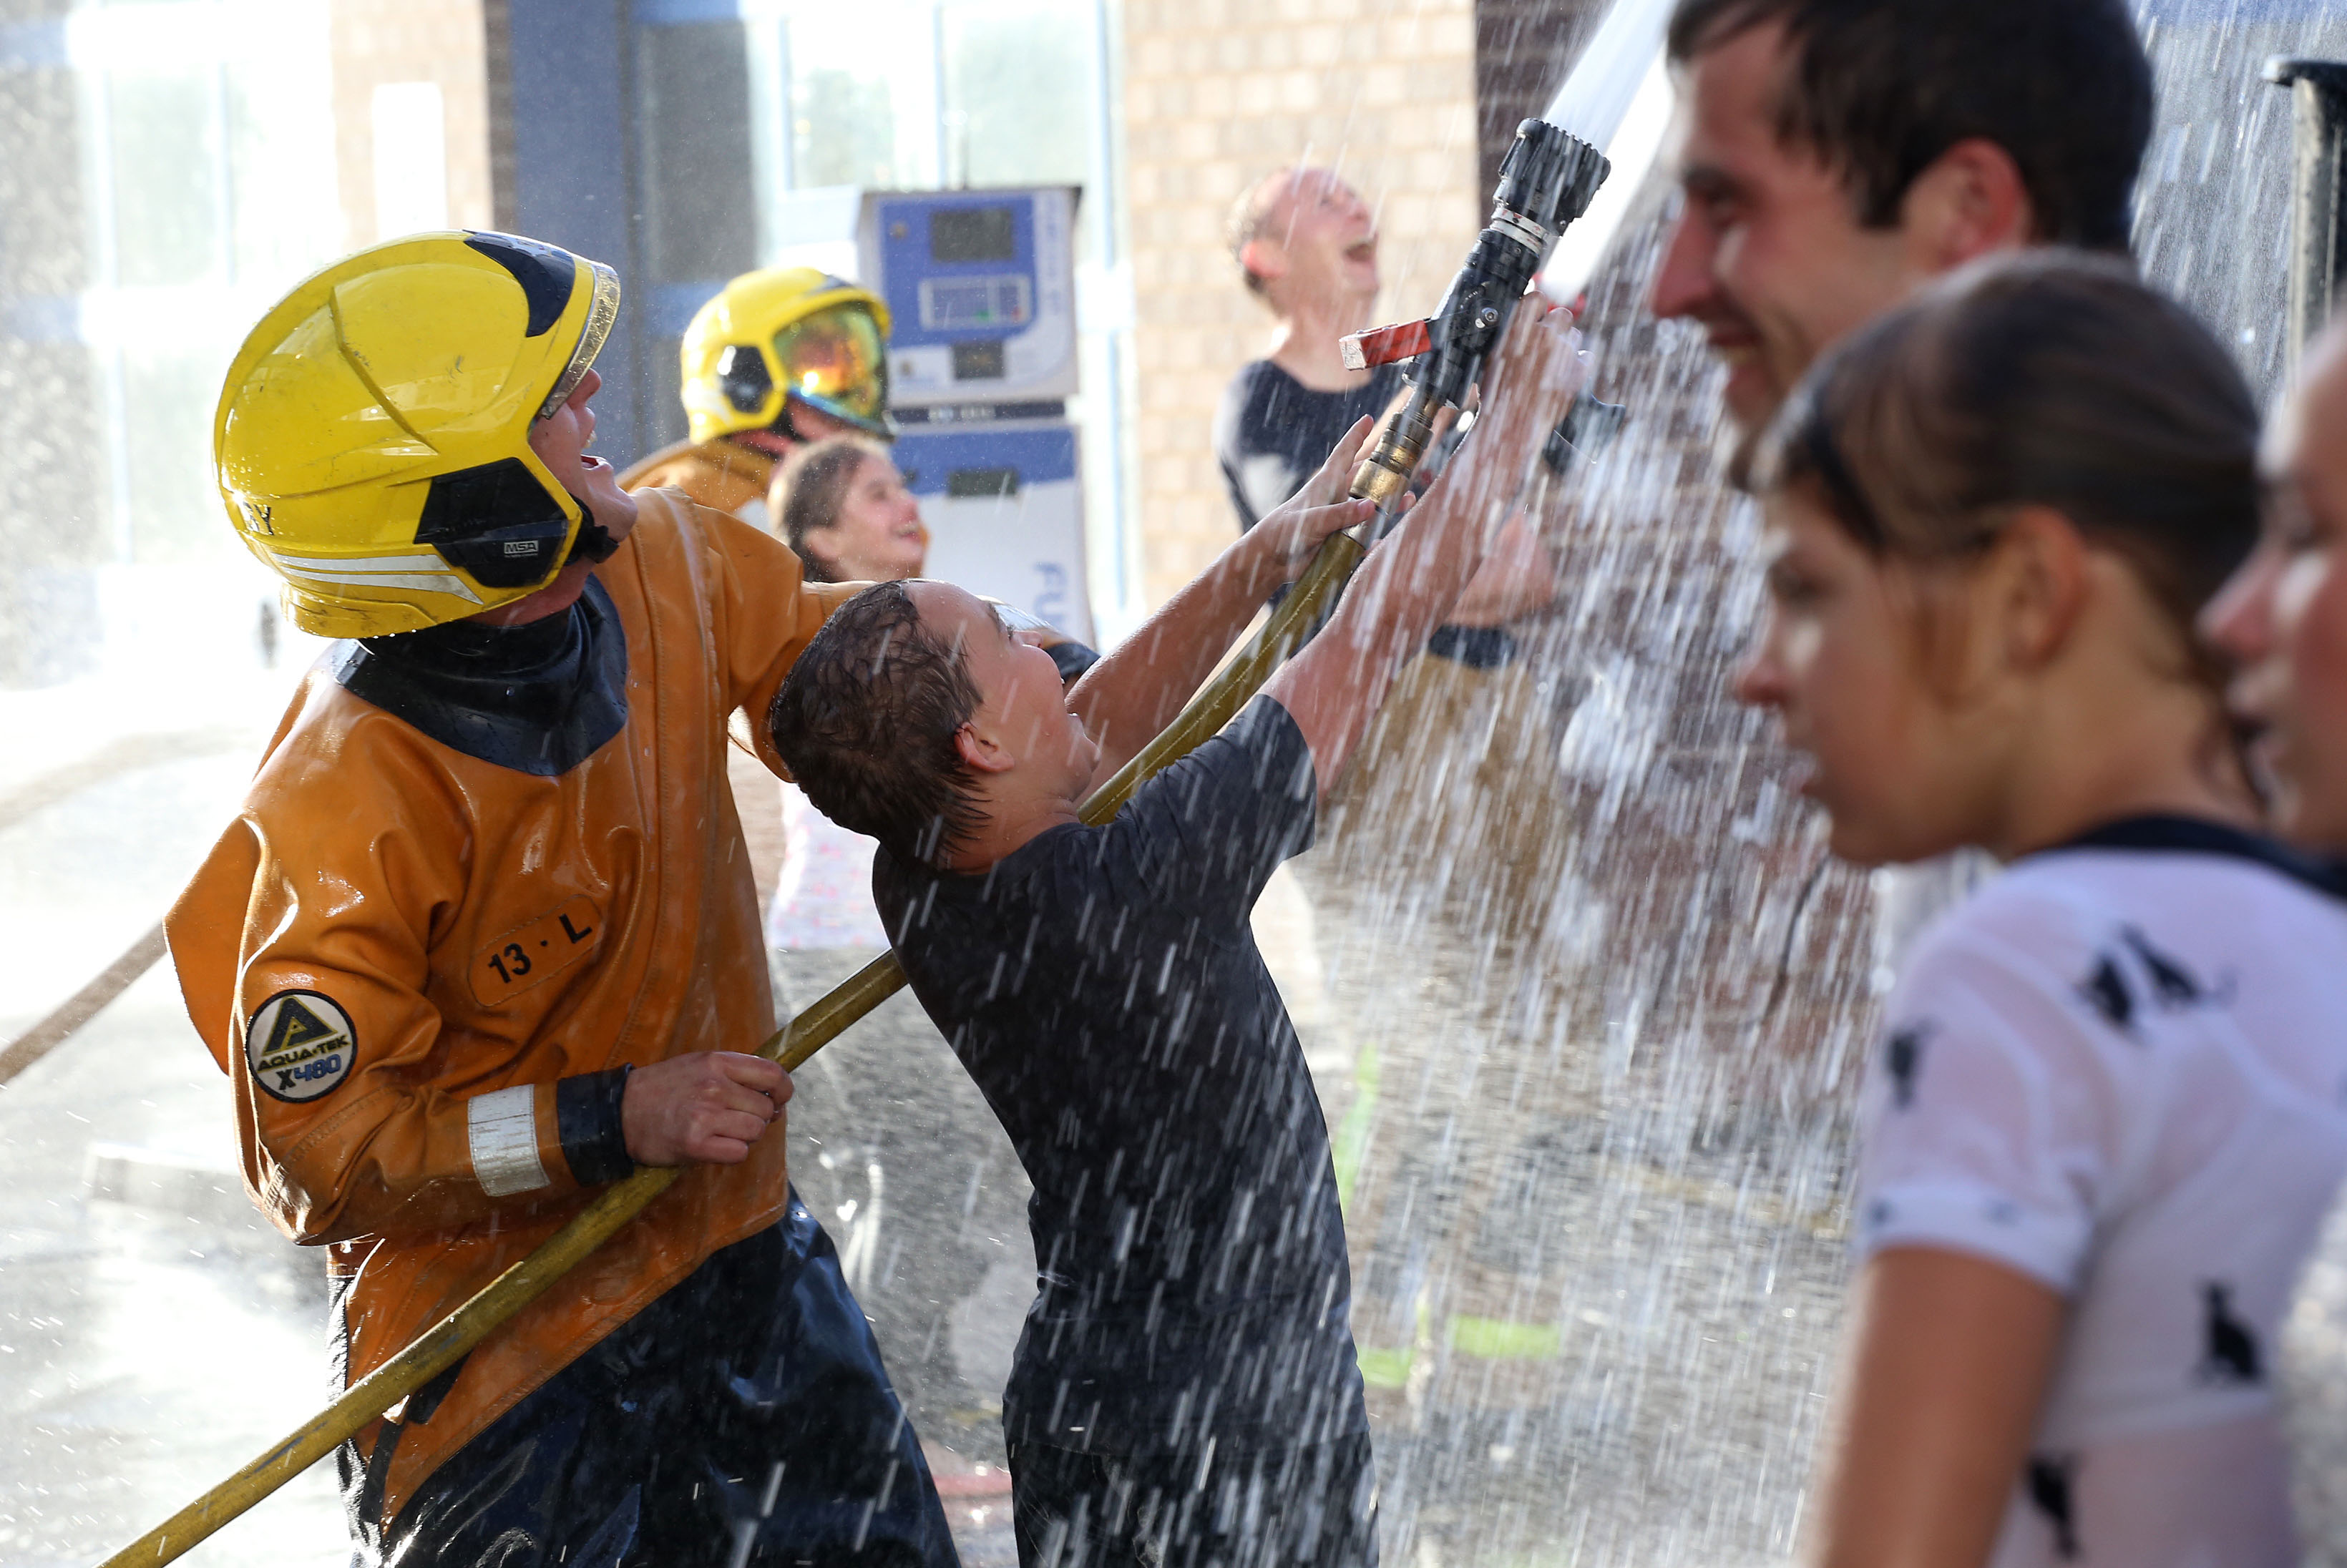 Fun with Shropshire firefighters for a boy from Chernobyl